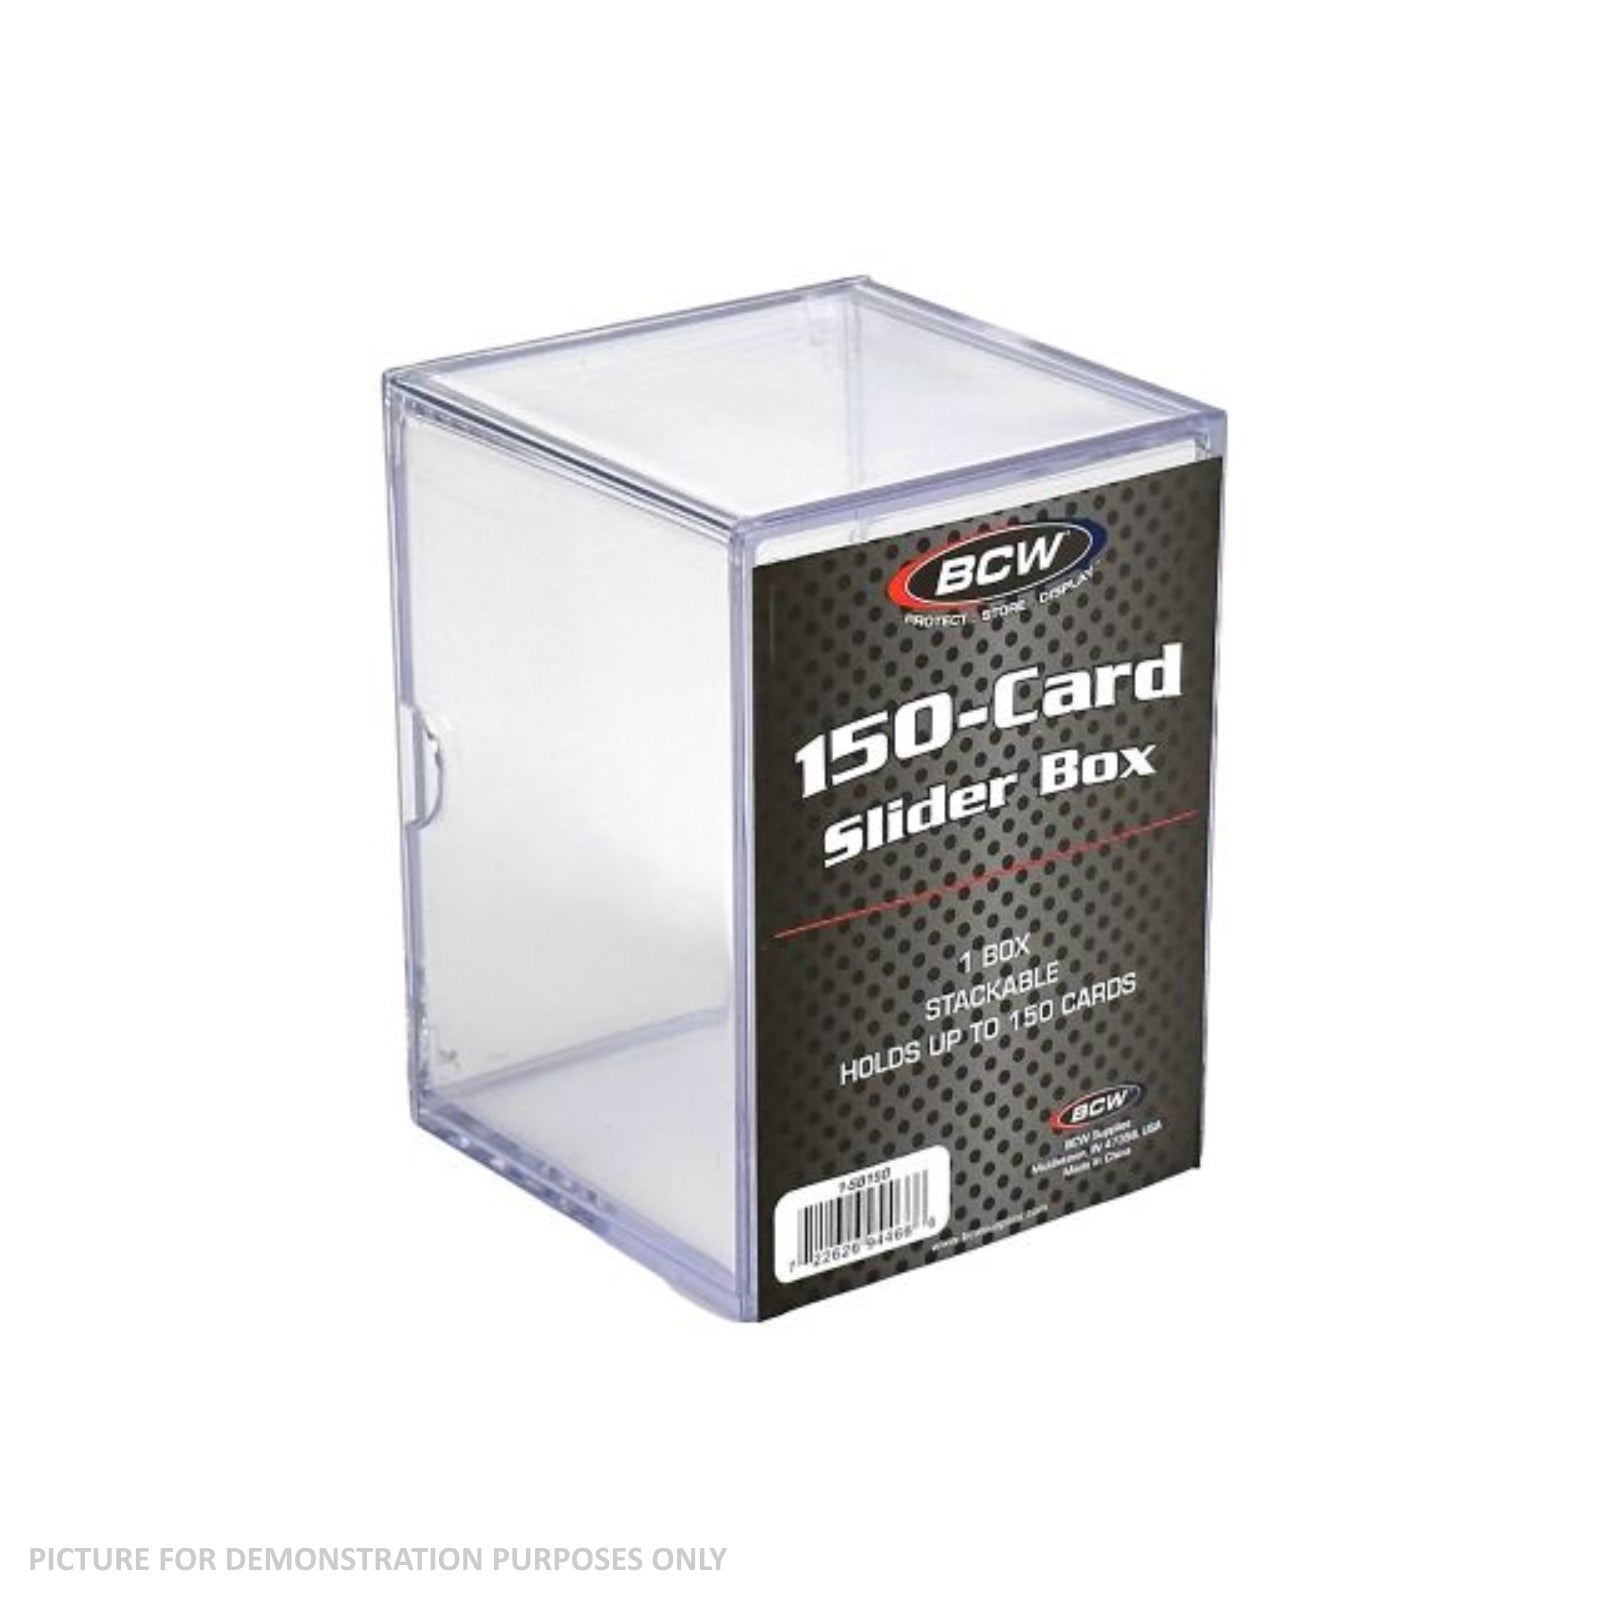  25 Toploader and 10 Stand Bundle, Designed for Perfect Trading  Card Display and Protection Including Sports Cards, MTG, Yugioh, Pokemon  and Other Standard Sized Cards. : Sports & Outdoors